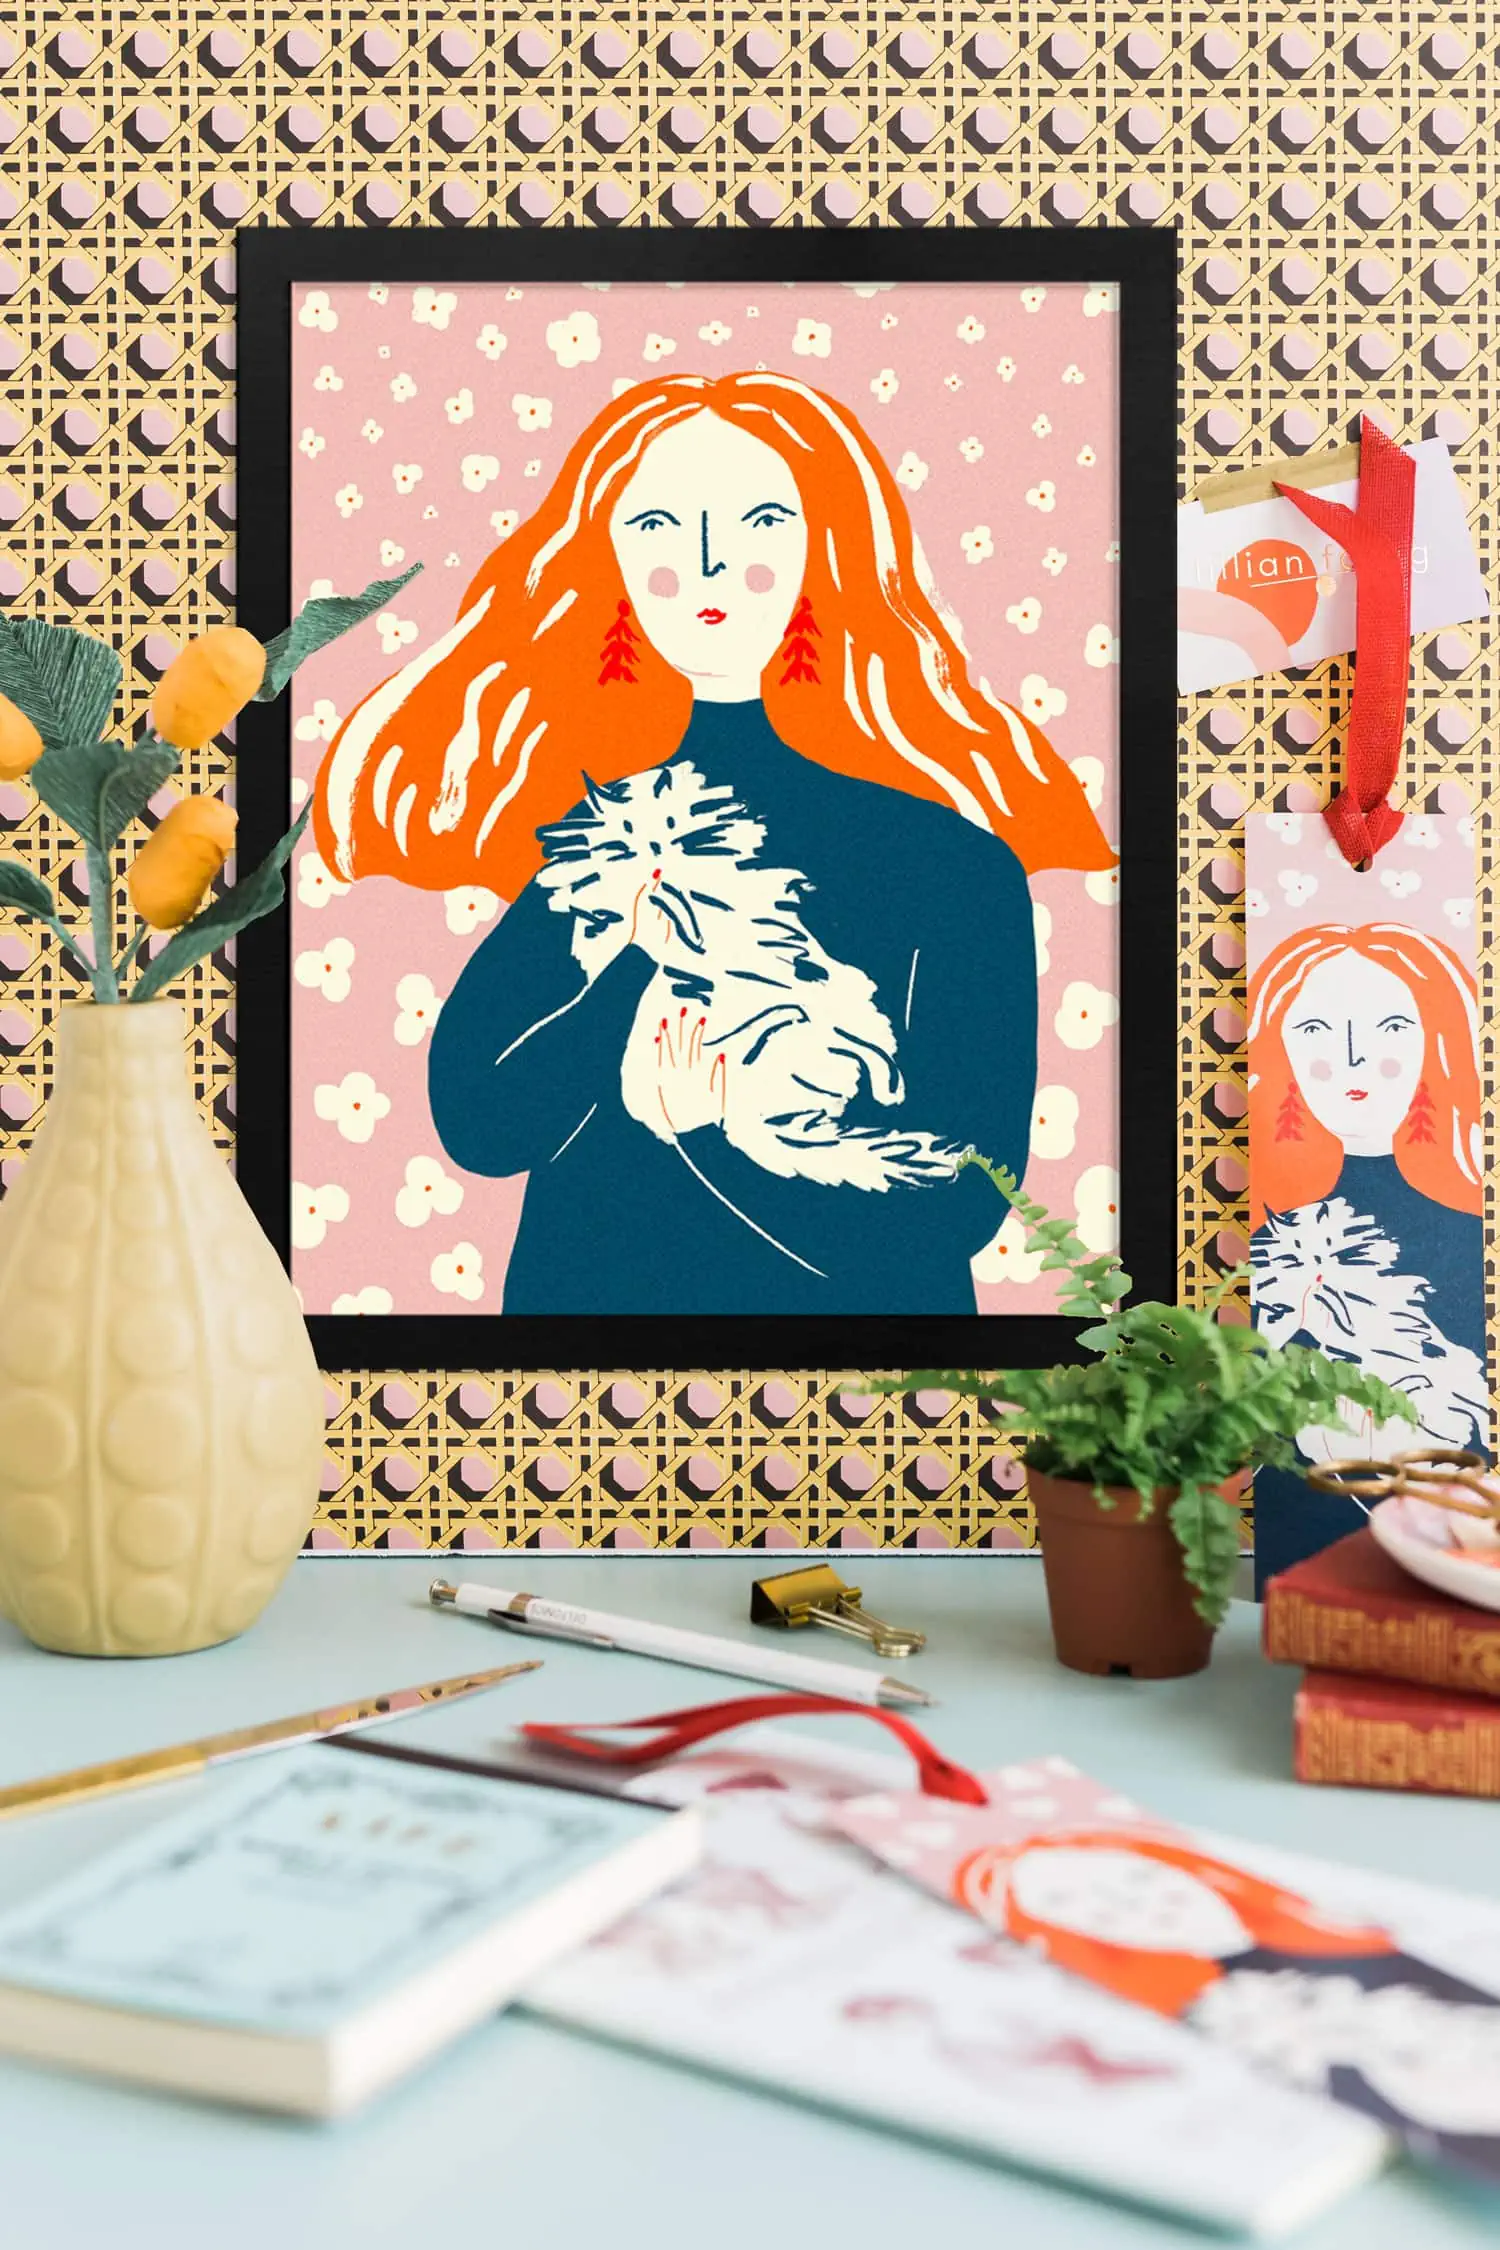 Portrait of Grace Coddington by Josefina Shargorodsky among paper and real plants on a patterned wall